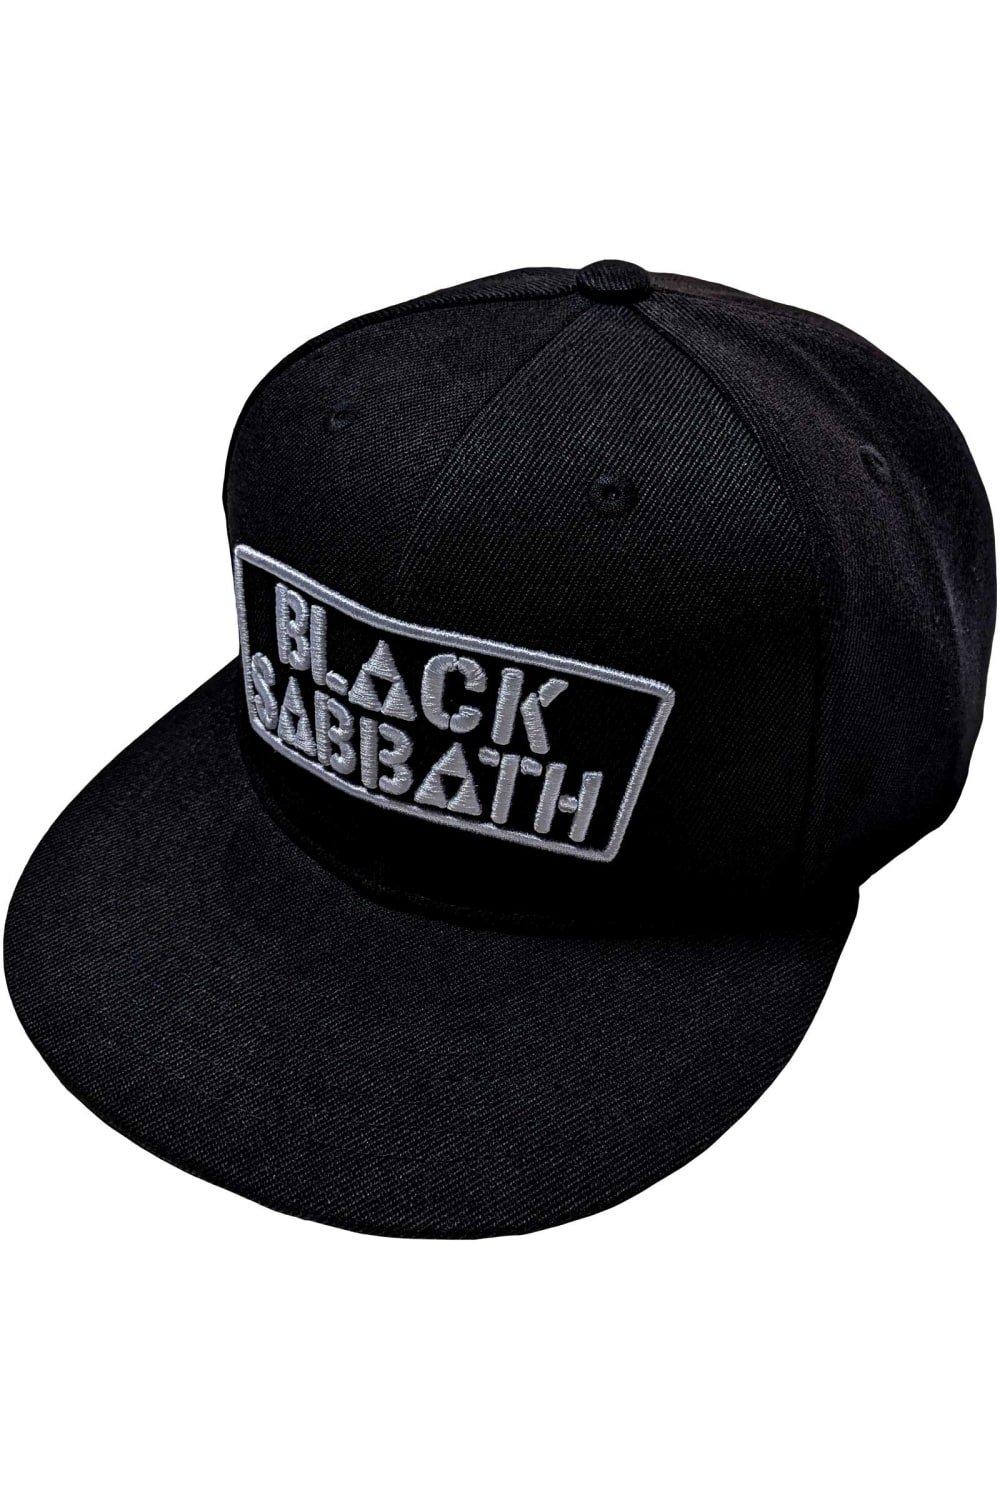 Кепка Snapback Never Say Die Black Sabbath, черный rare 80s mercenaries never say die military armed special force men t shirt short casual customized products